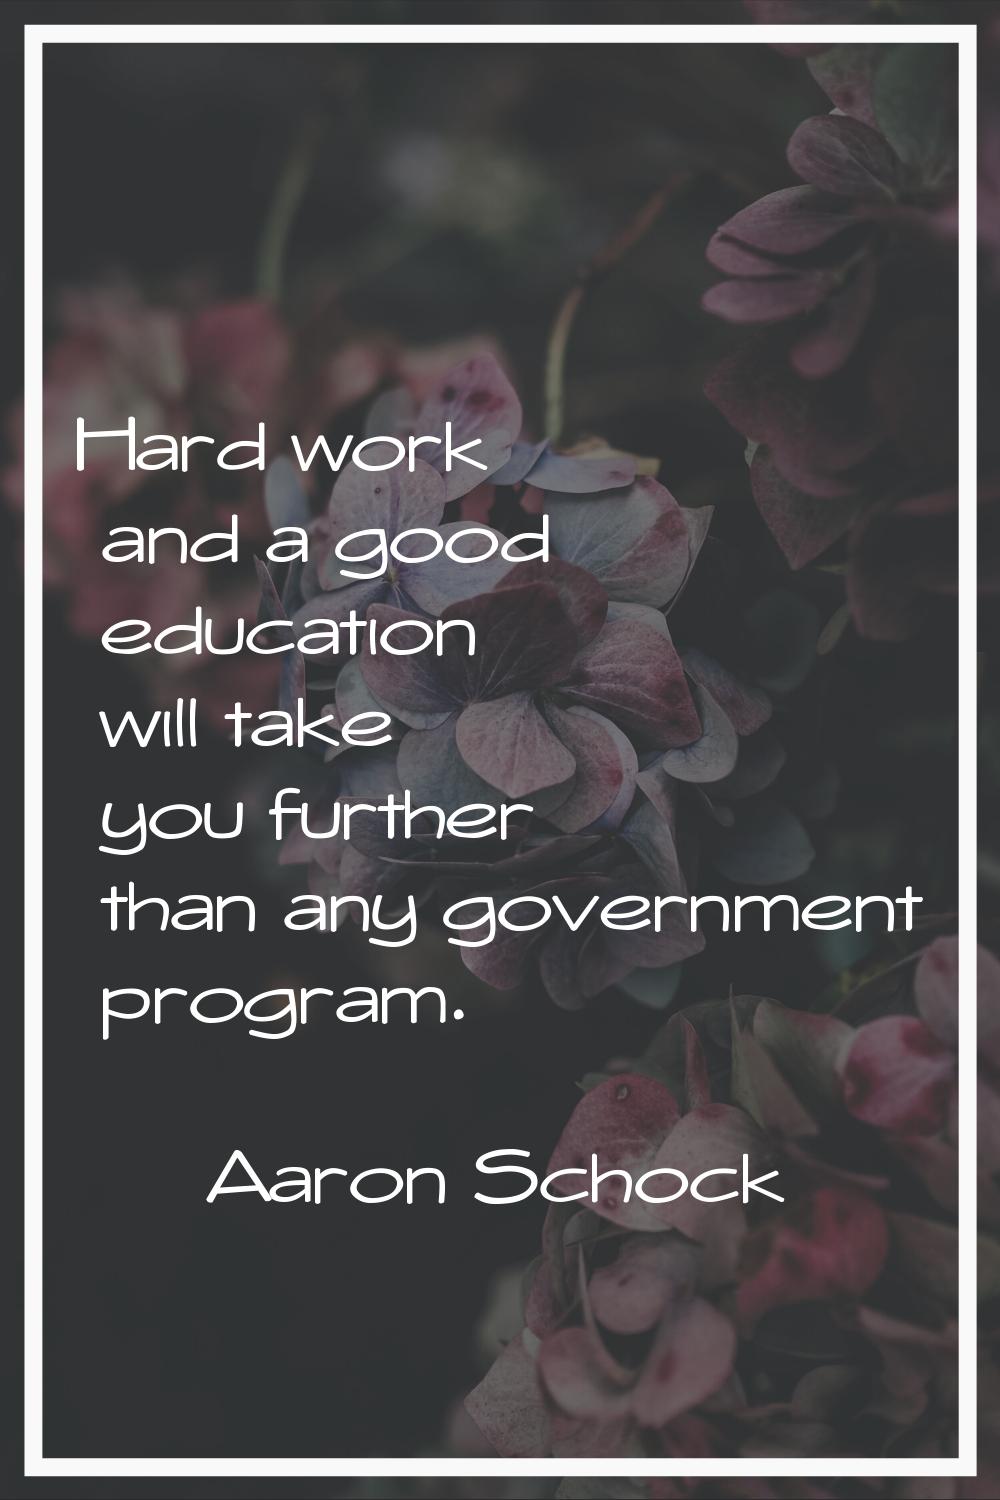 Hard work and a good education will take you further than any government program.